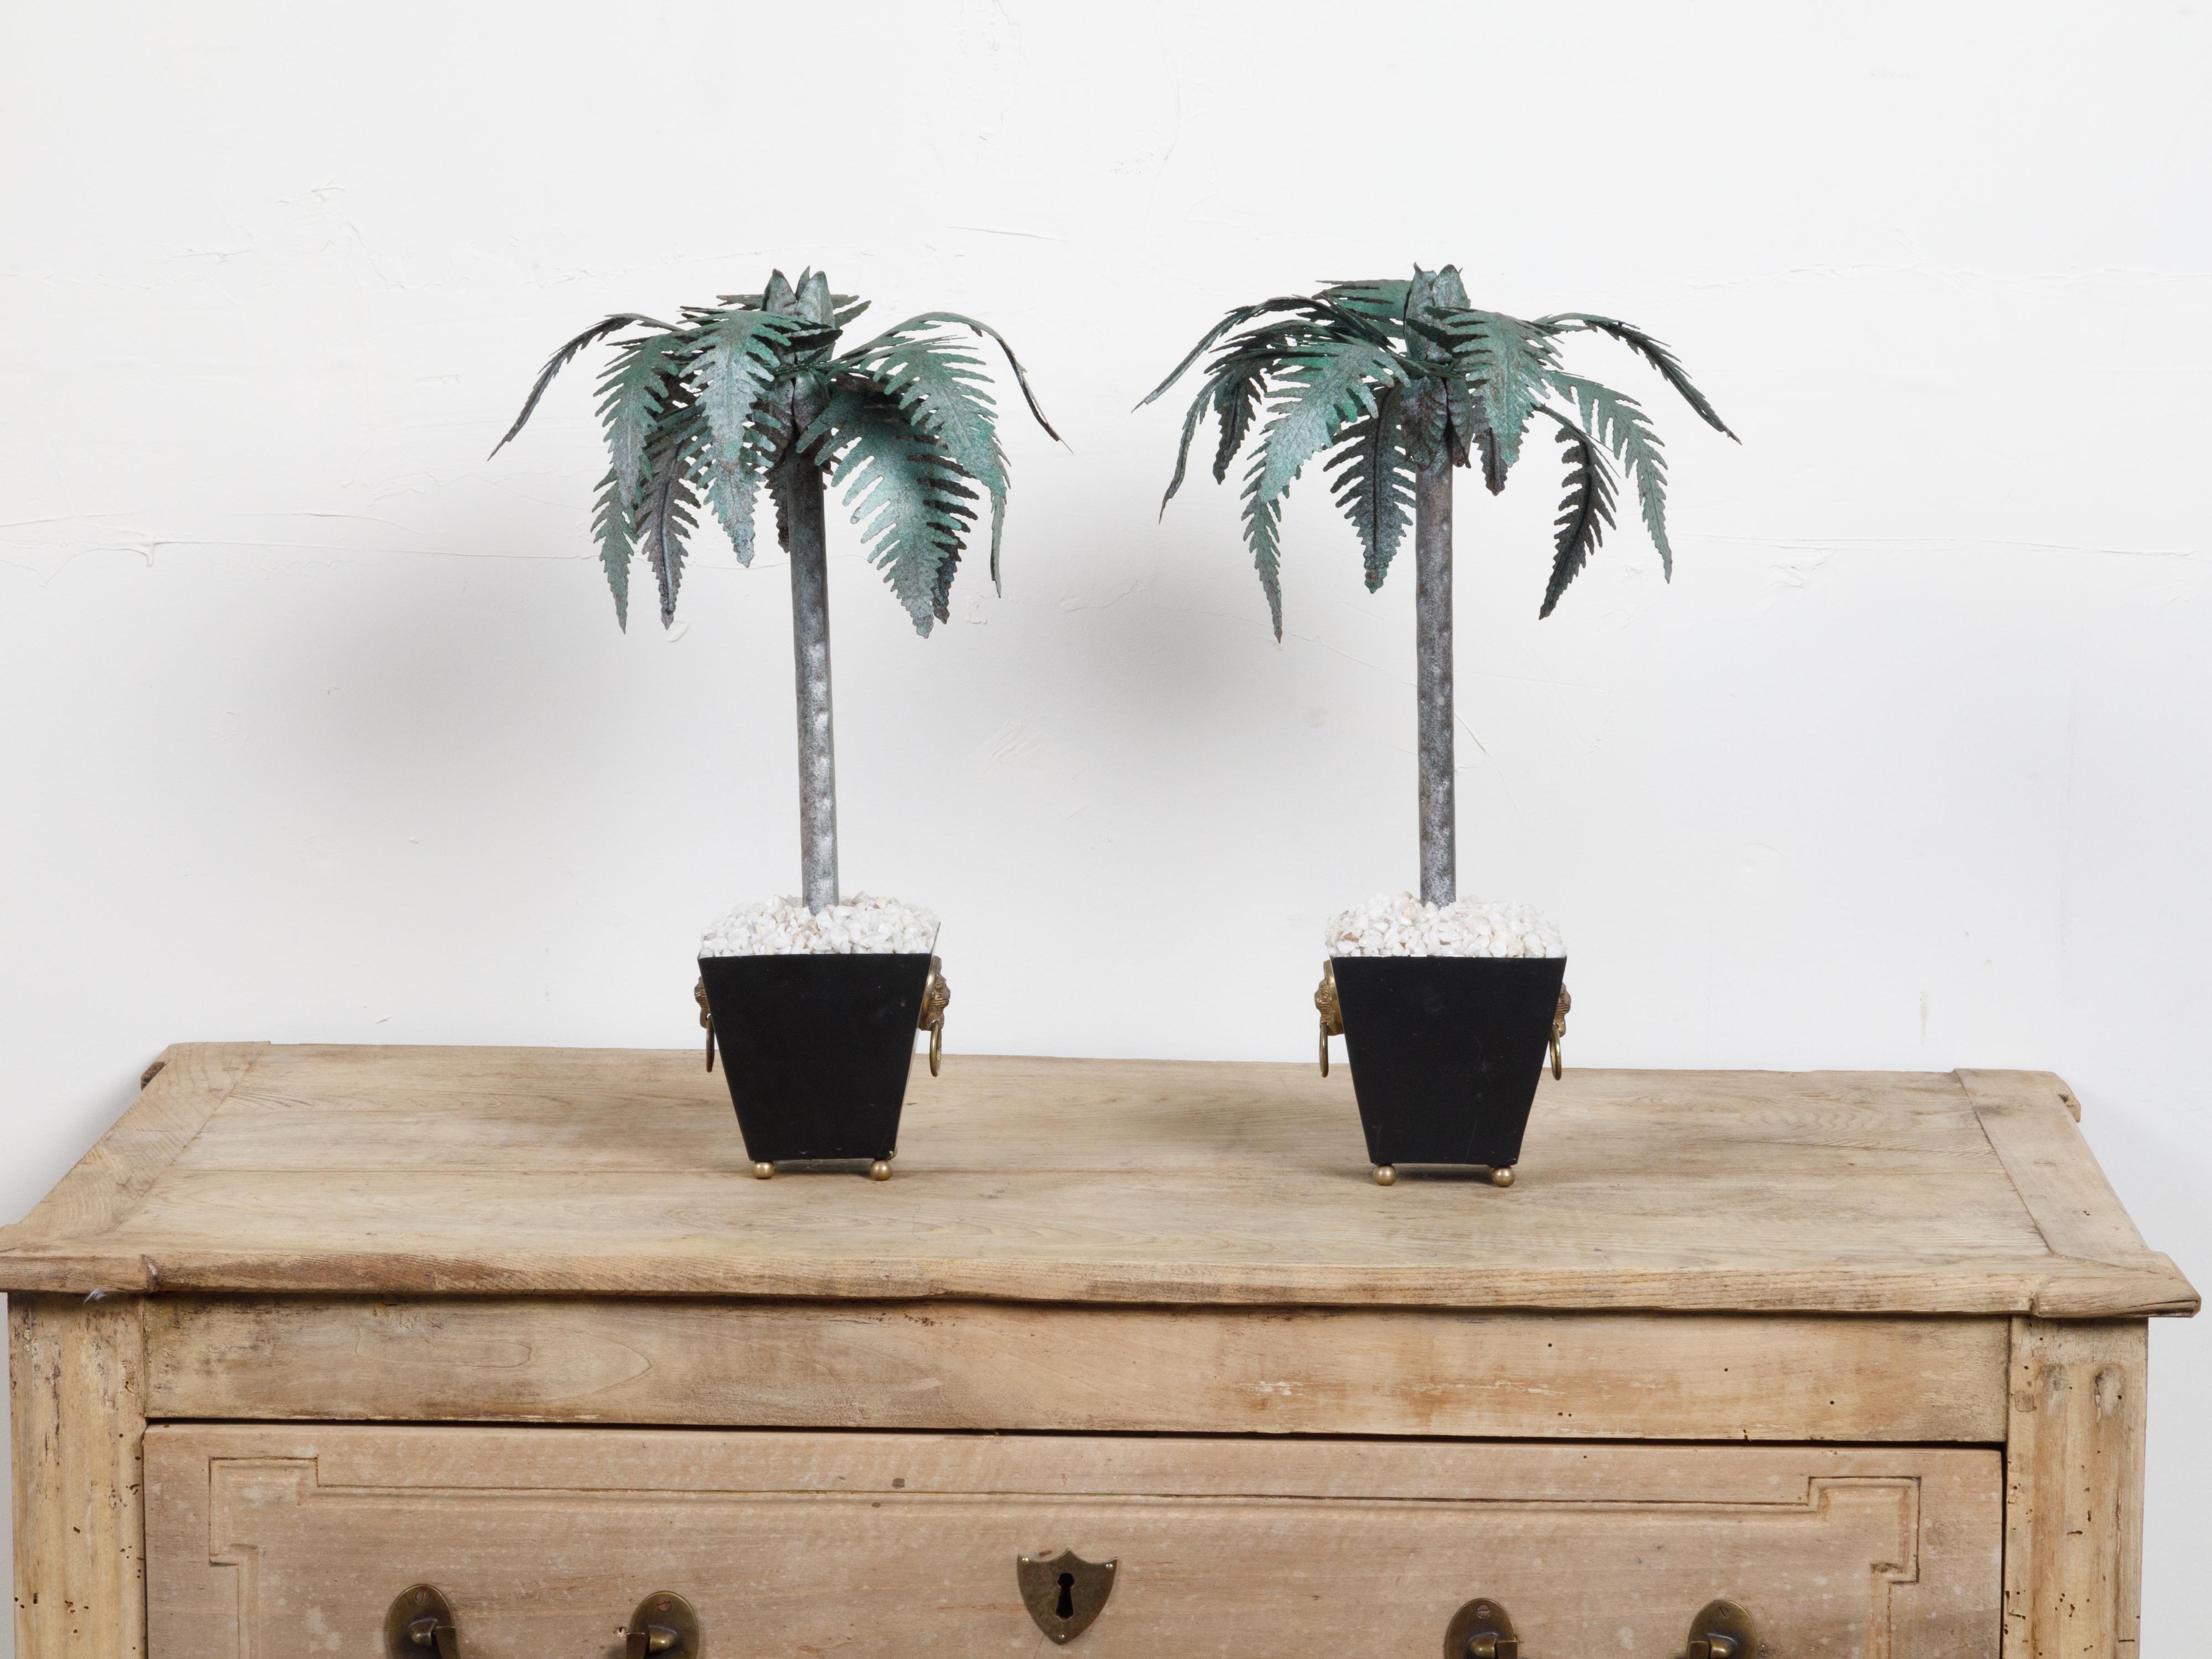 Pair of French Midcentury Palm Tree Sculptures in Black Tapering Pots For Sale 1